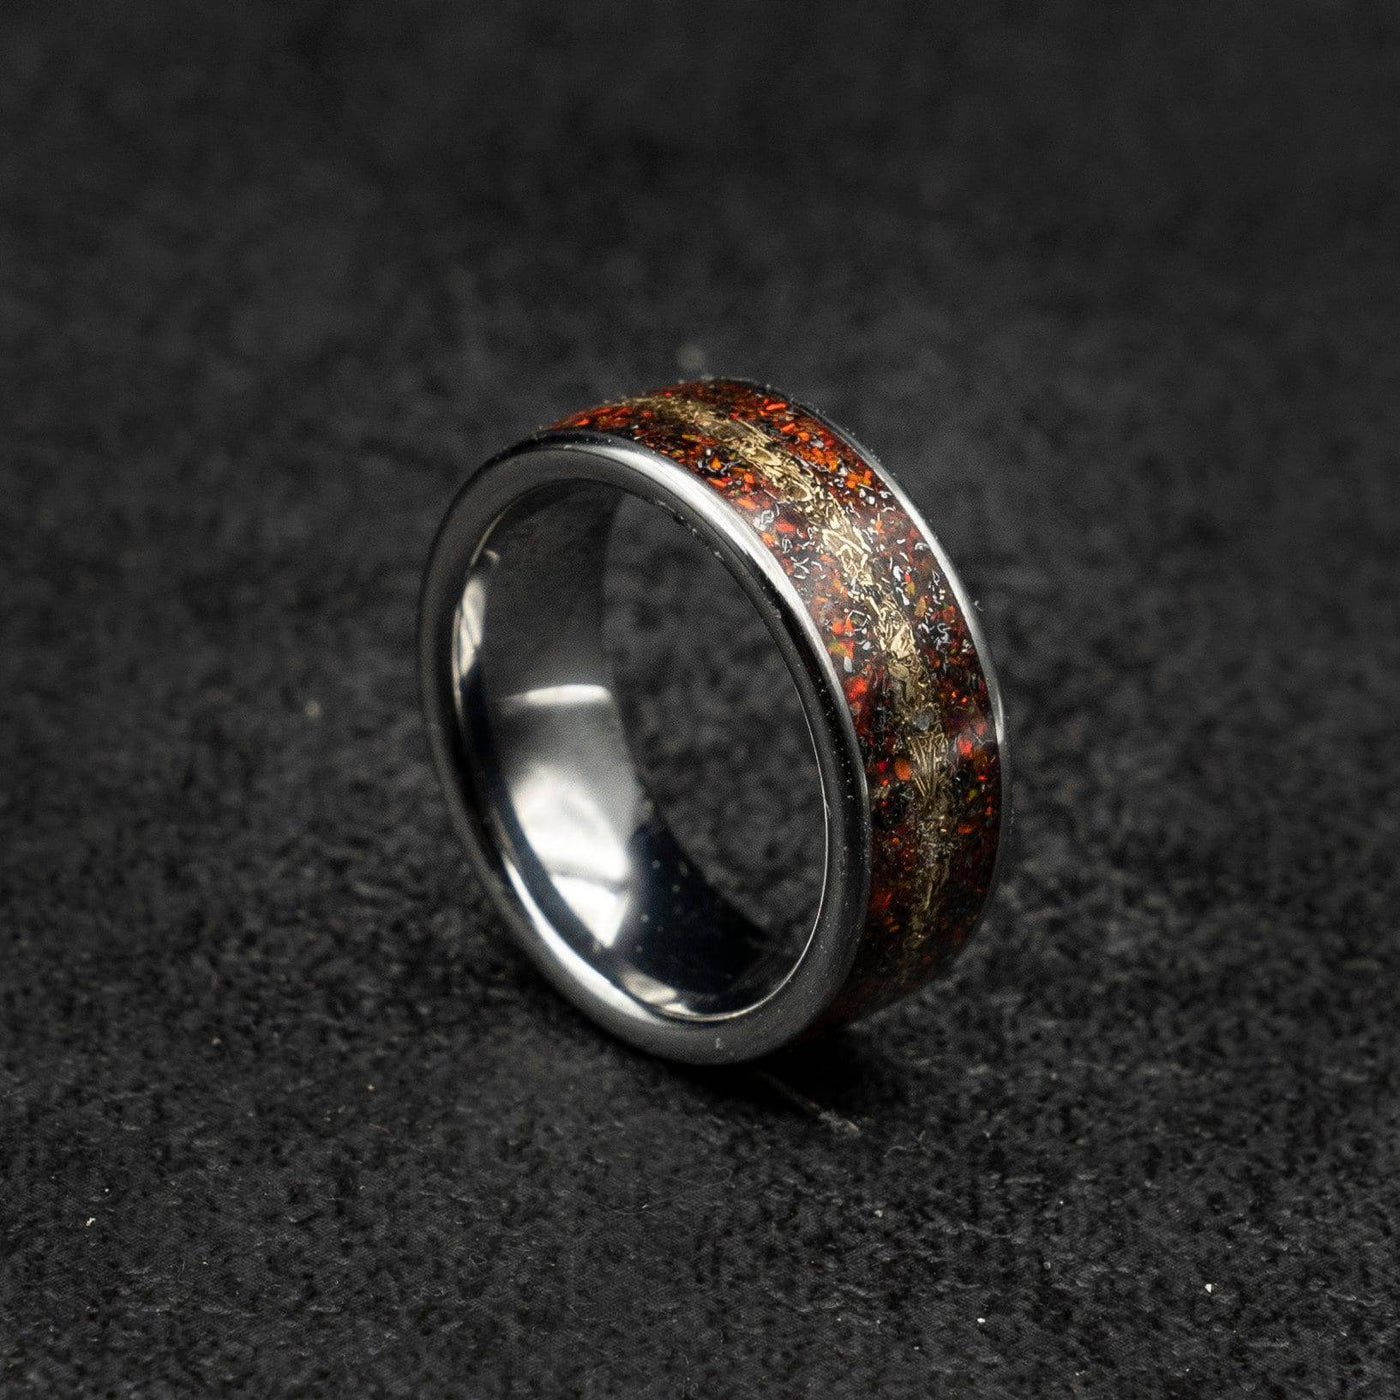 Tungsten ring filled with red opal and mokume gane | Decazi